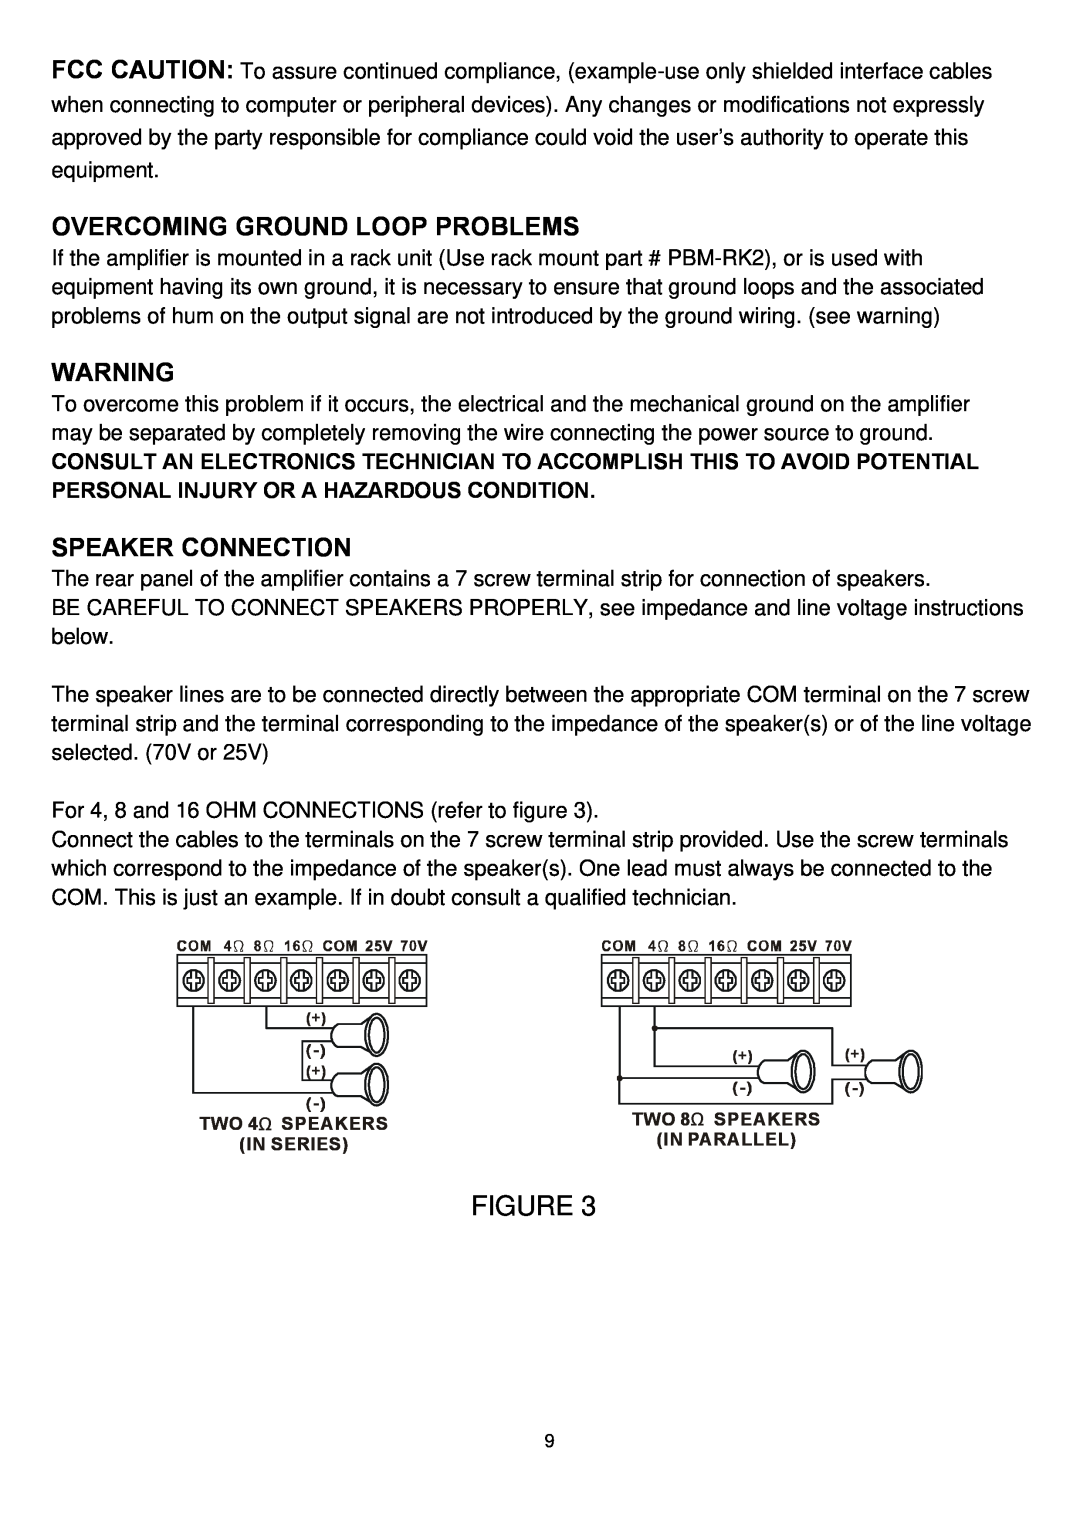 Speco Technologies P-30FACC instruction manual Overcoming Ground Loop Problems, Speaker Connection 